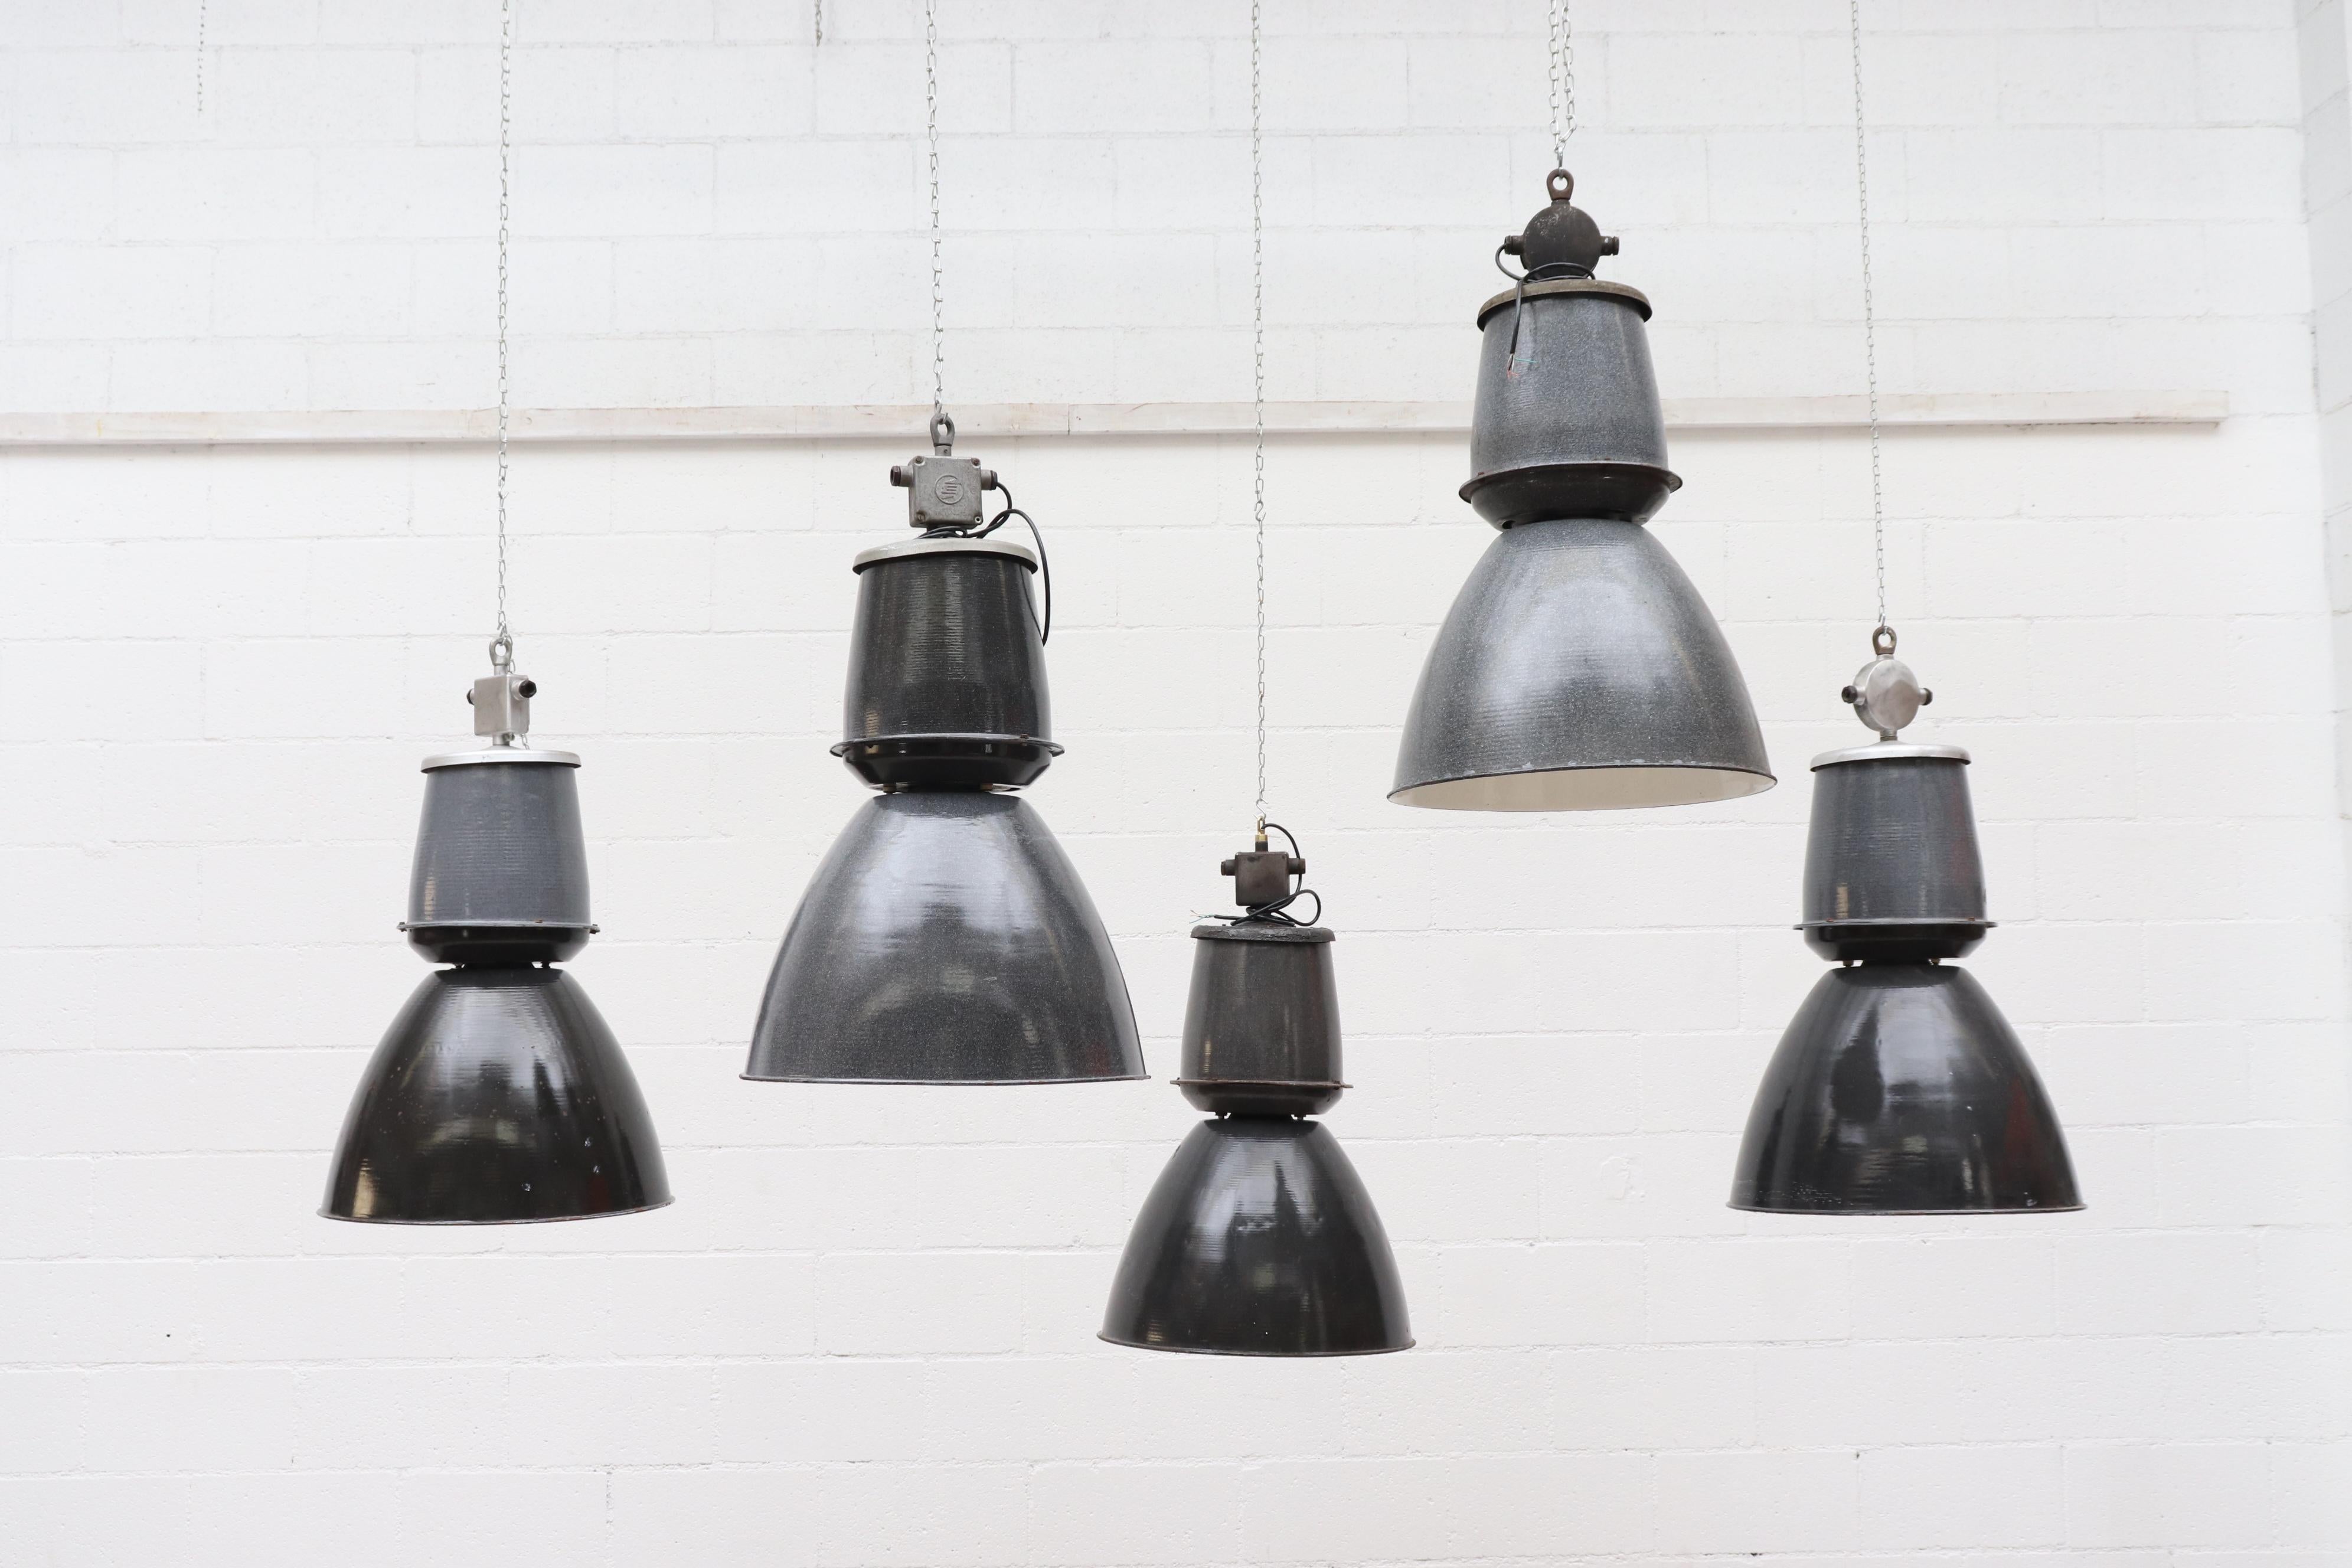 Gorgeous industrial charcoal enameled factory ceiling lamps and white enameled interior. All in original condition with visible wear and minimal chipping consistent with their age and usage. Others available in varying color tones Listed Separately. 